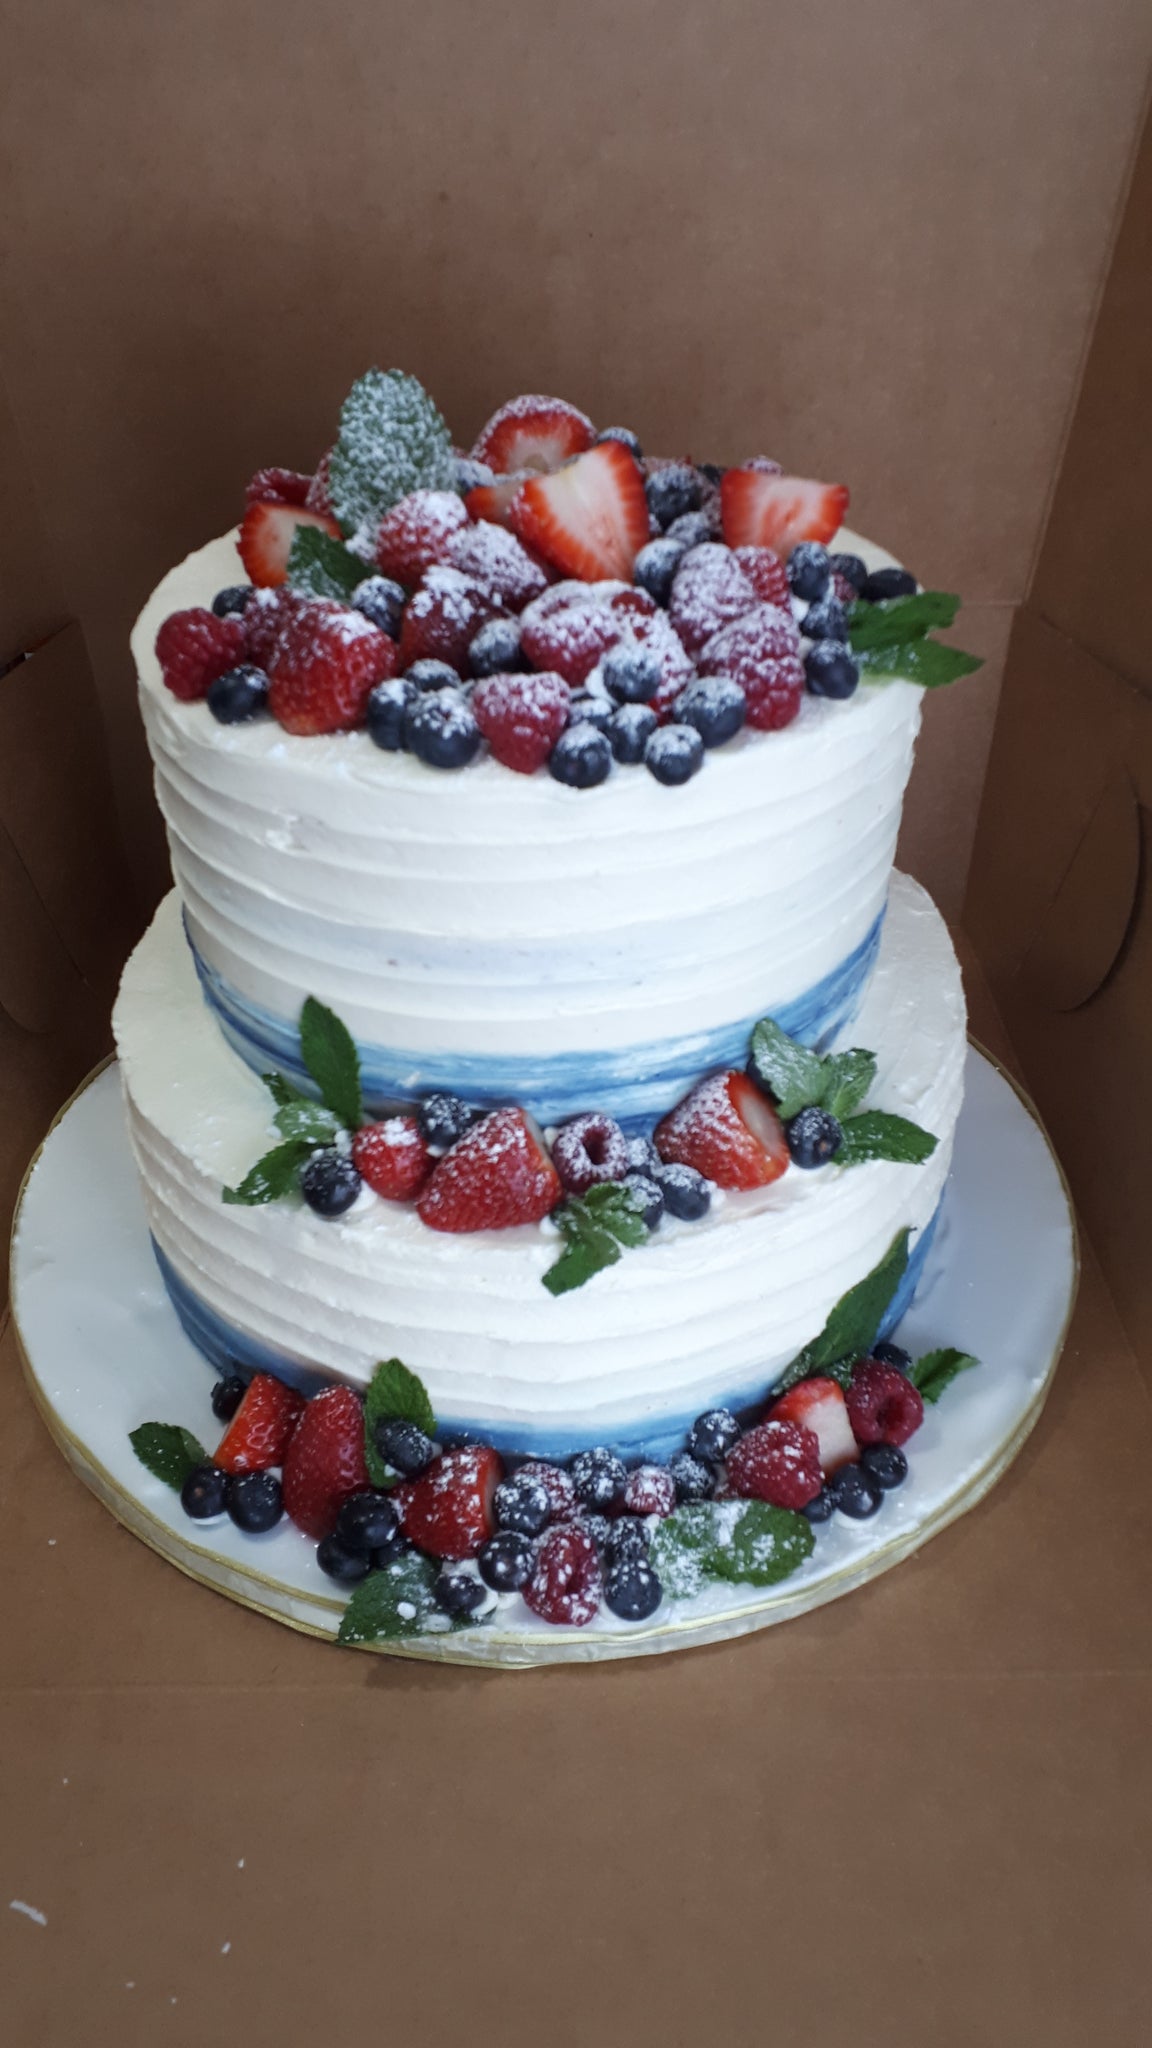 Mandy's baking journey: Two tiered Forest fruit cake